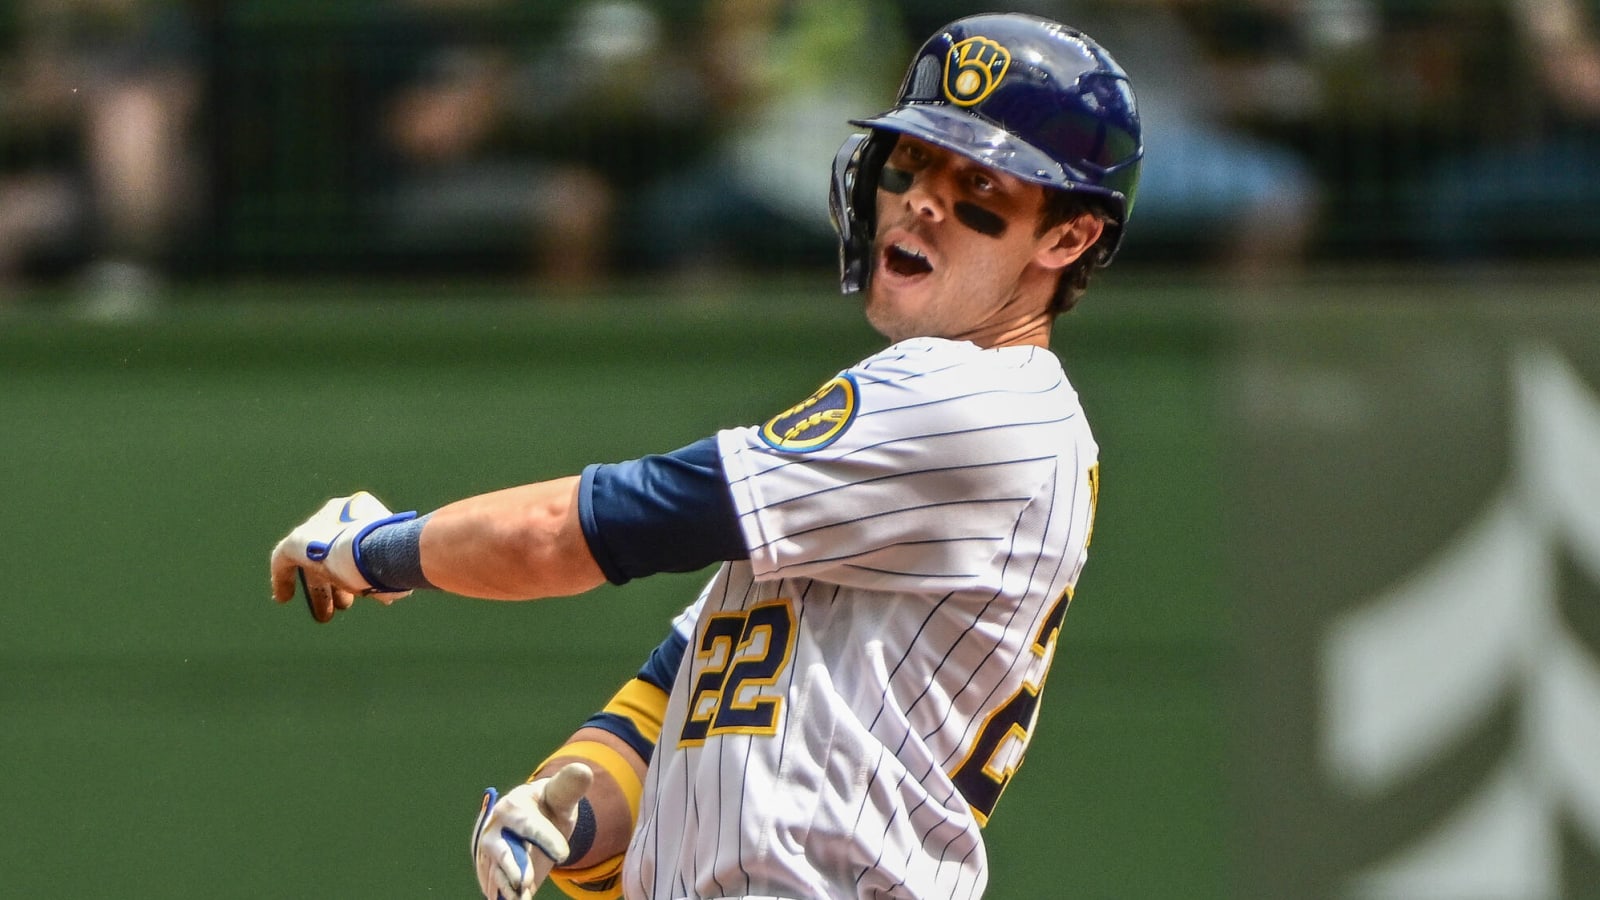 Brewers' Counsell: Yelich neck injury not anything major